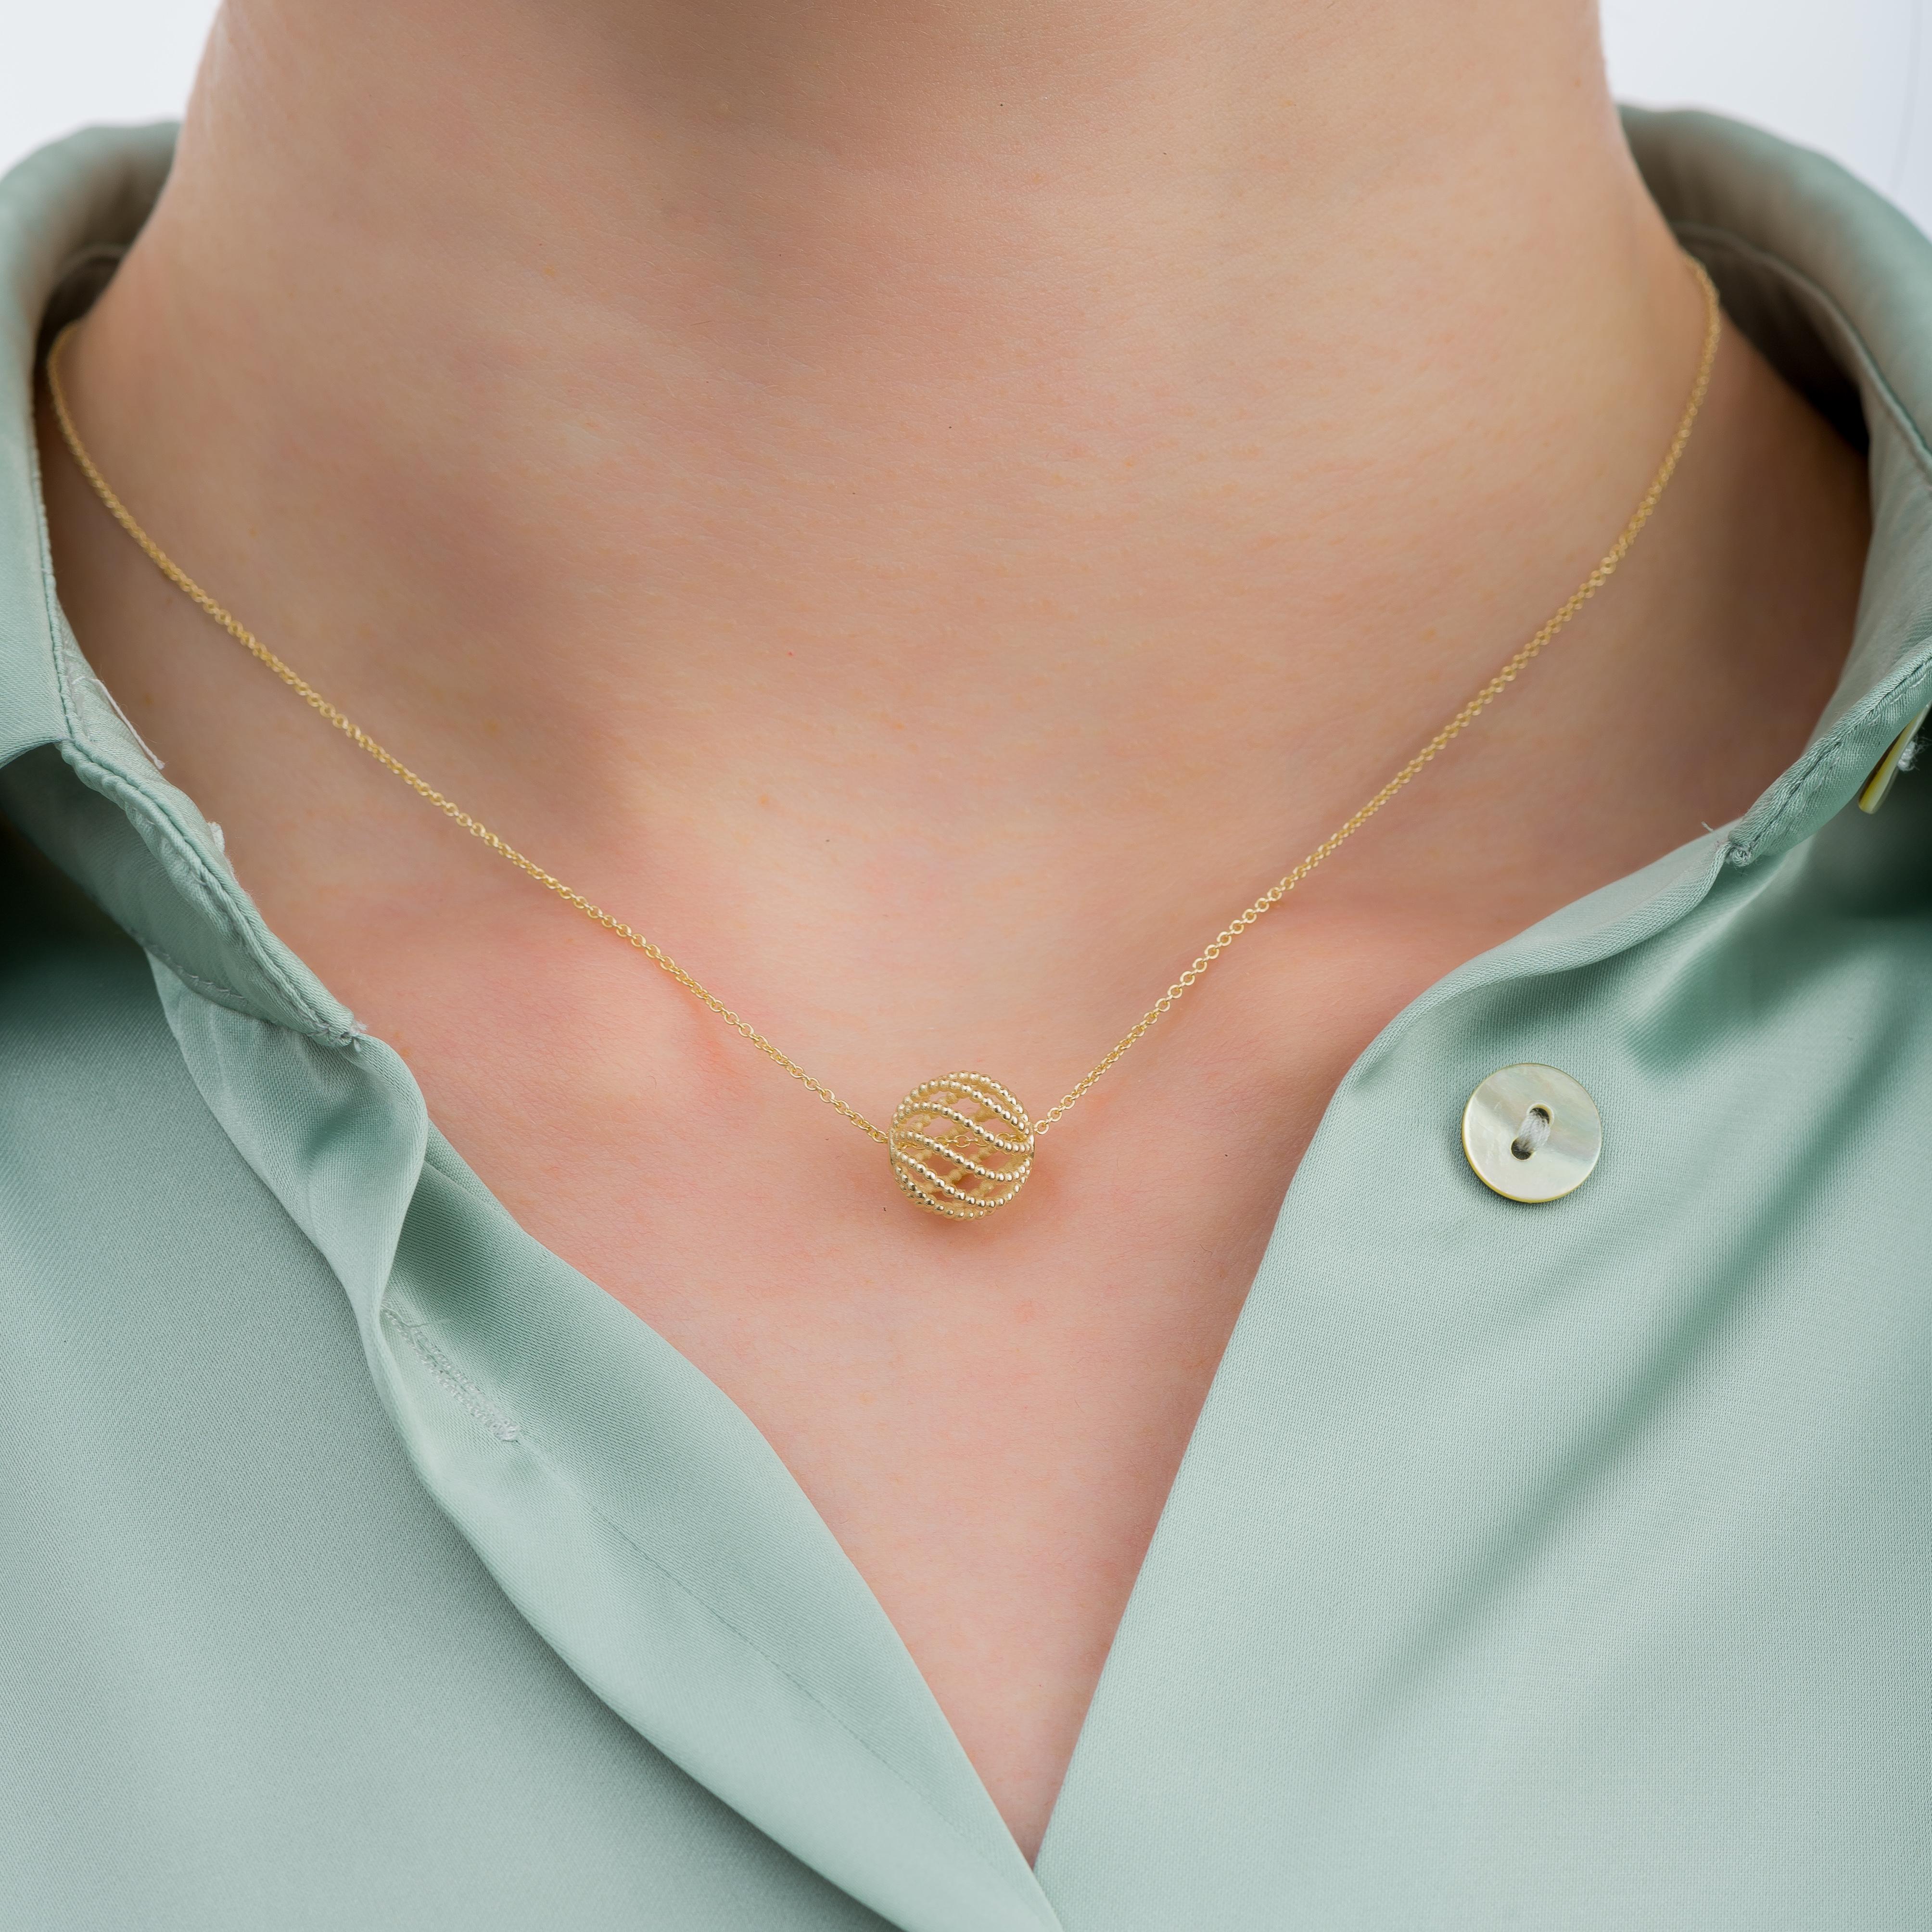 Adorn yourself with our exquisite gold open ball pendant, meticulously crafted from intricate granulations, a testament to the captivating beauty of artisan craftsmanship.

100% handmade in our workshop.

Metal: 18K Gold

Every pendant is